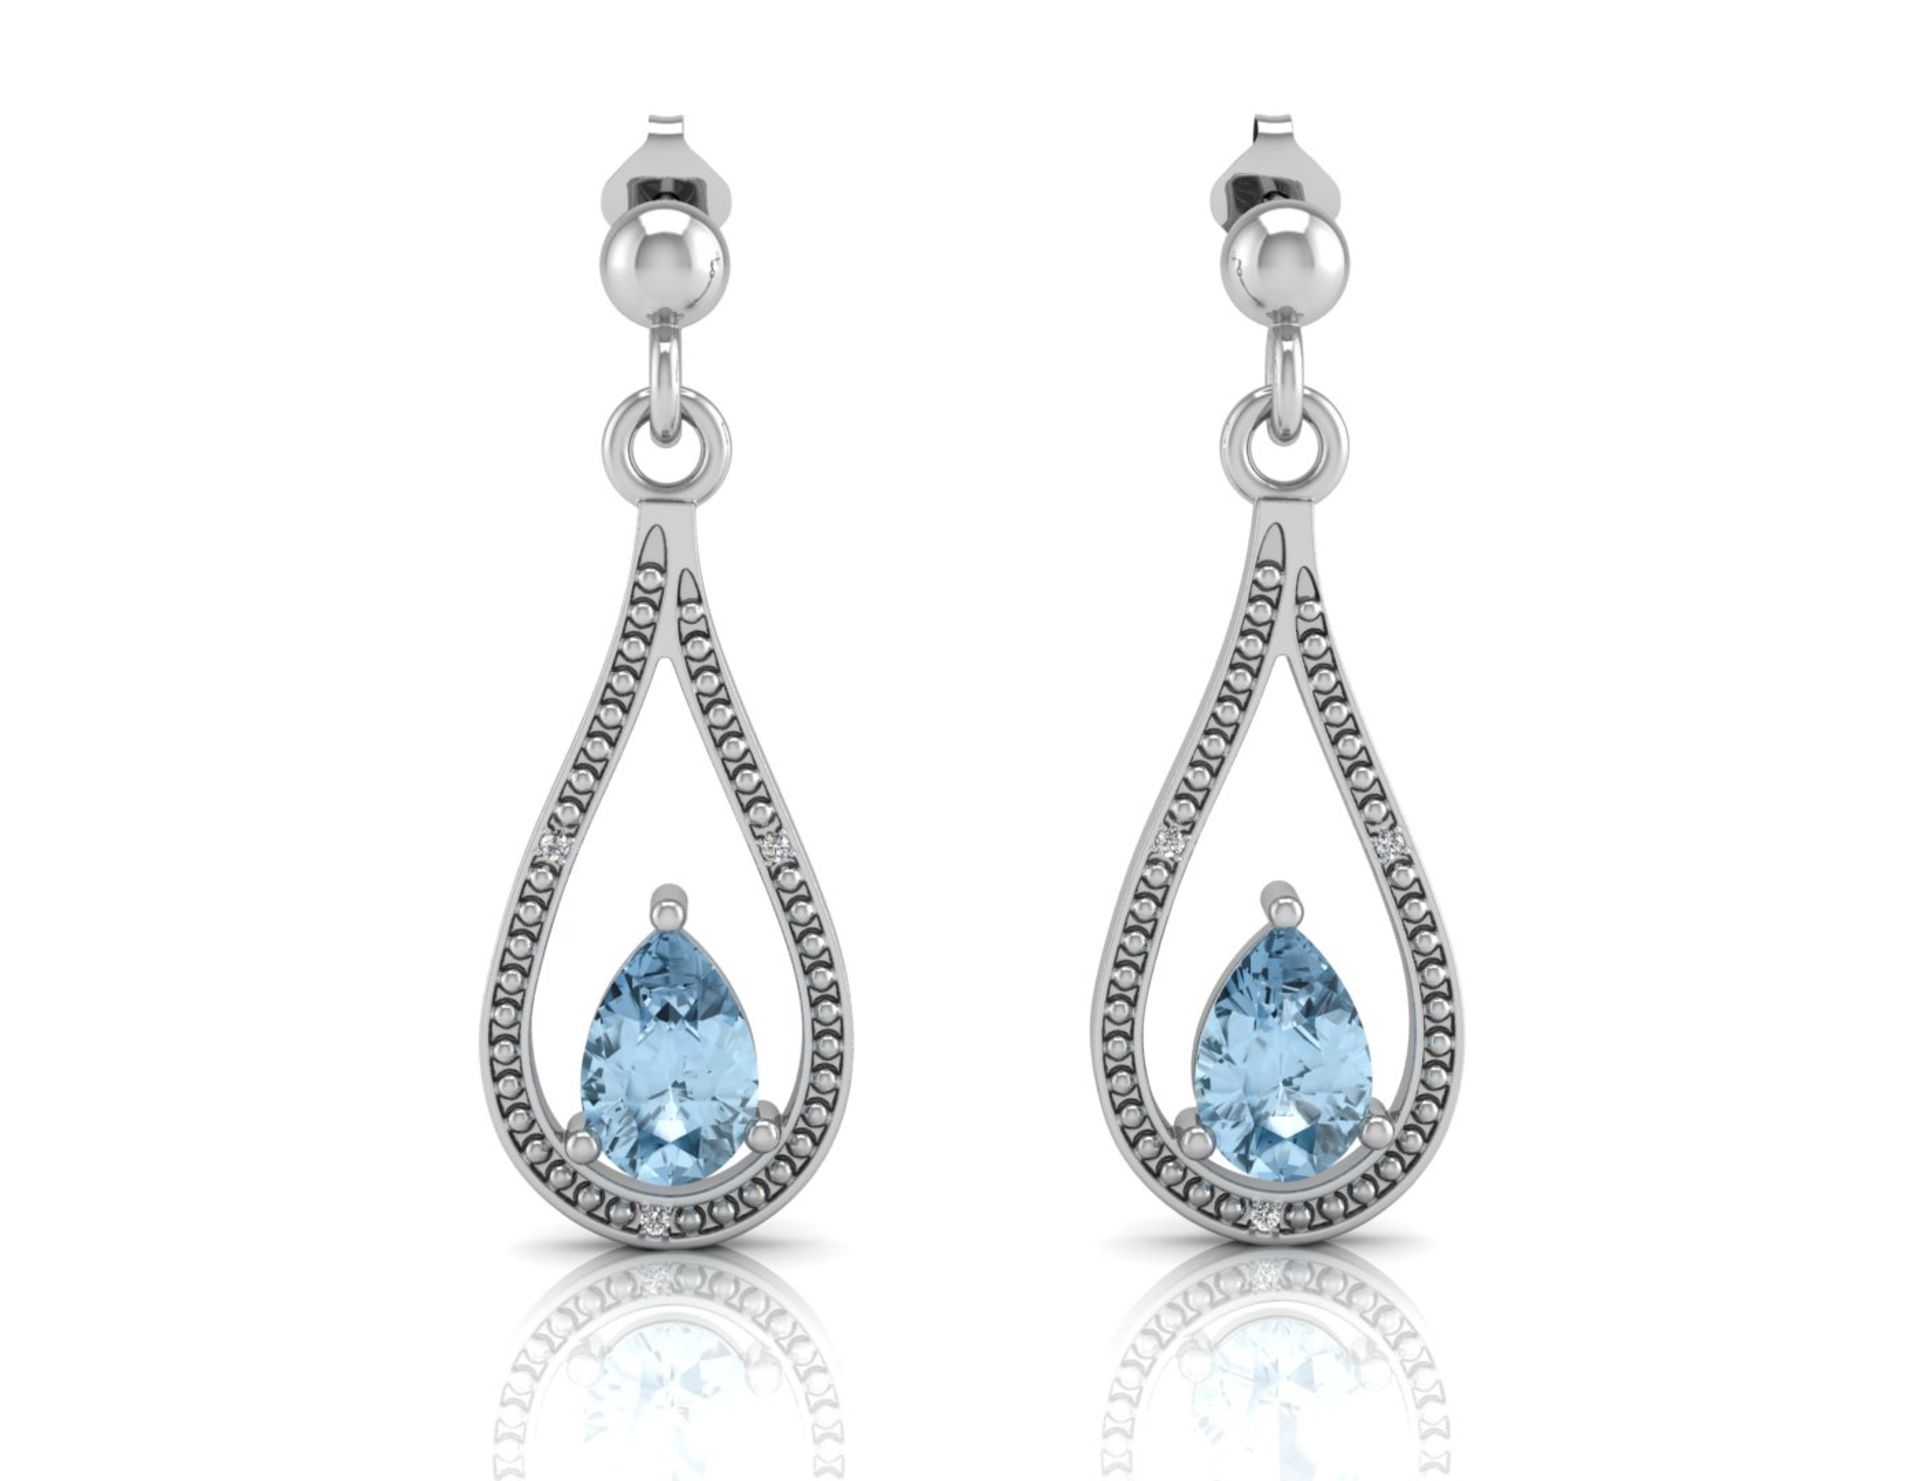 9ct White Gold Diamond And Blue Topaz Earring (BT 0.76) 0.02 Carats - Valued By IDI £1,705.00 - - Image 3 of 4